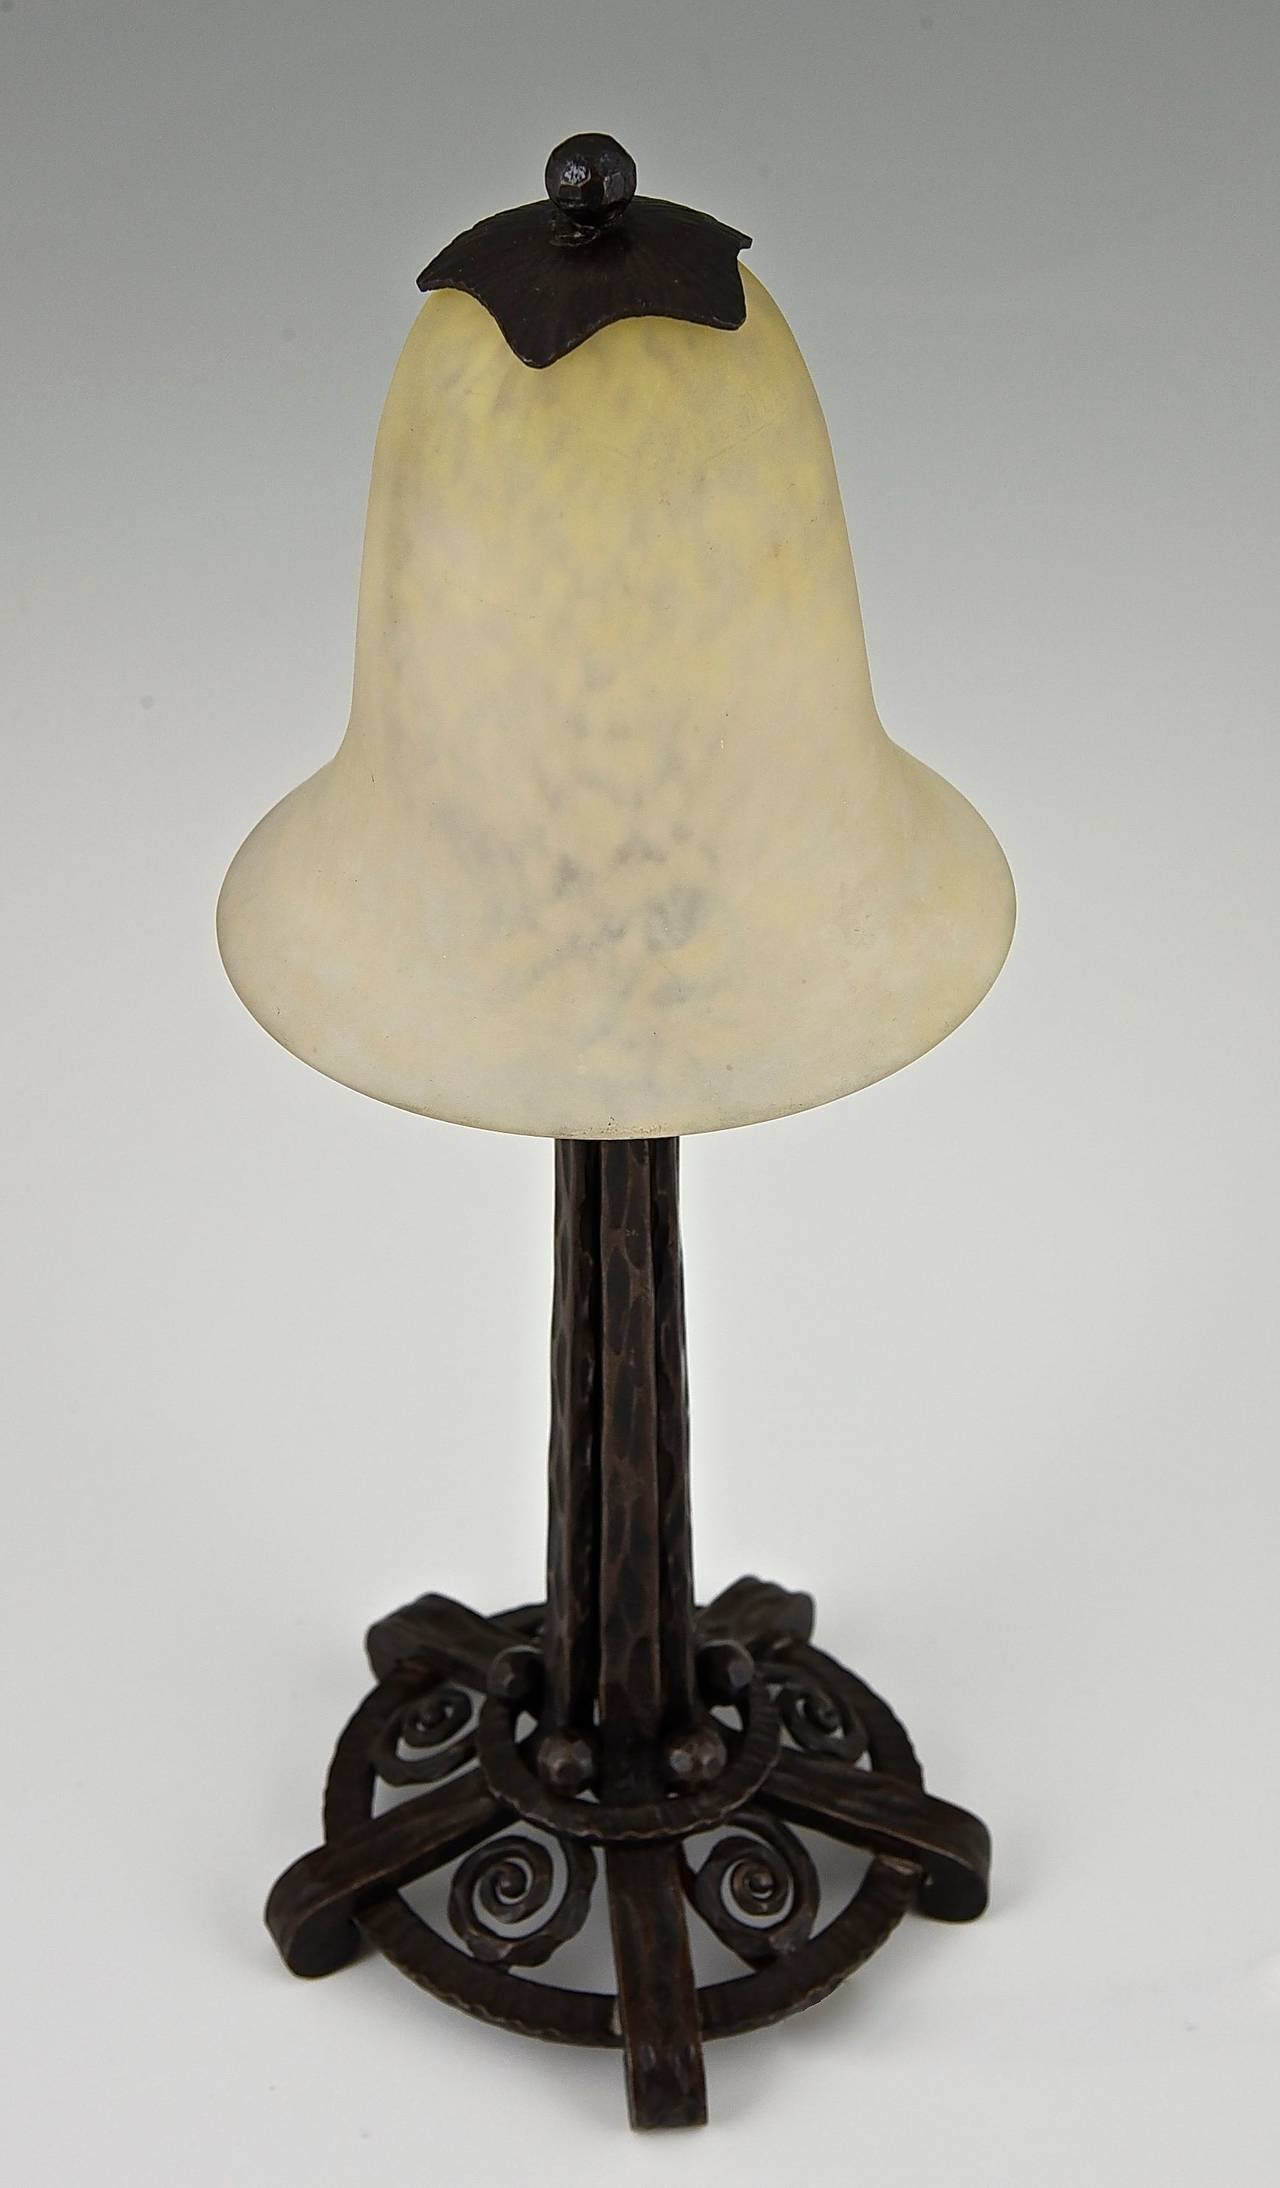 Art Deco Wrought Iron and Glass Table Lamp by Schneider 1924  France (Art déco)